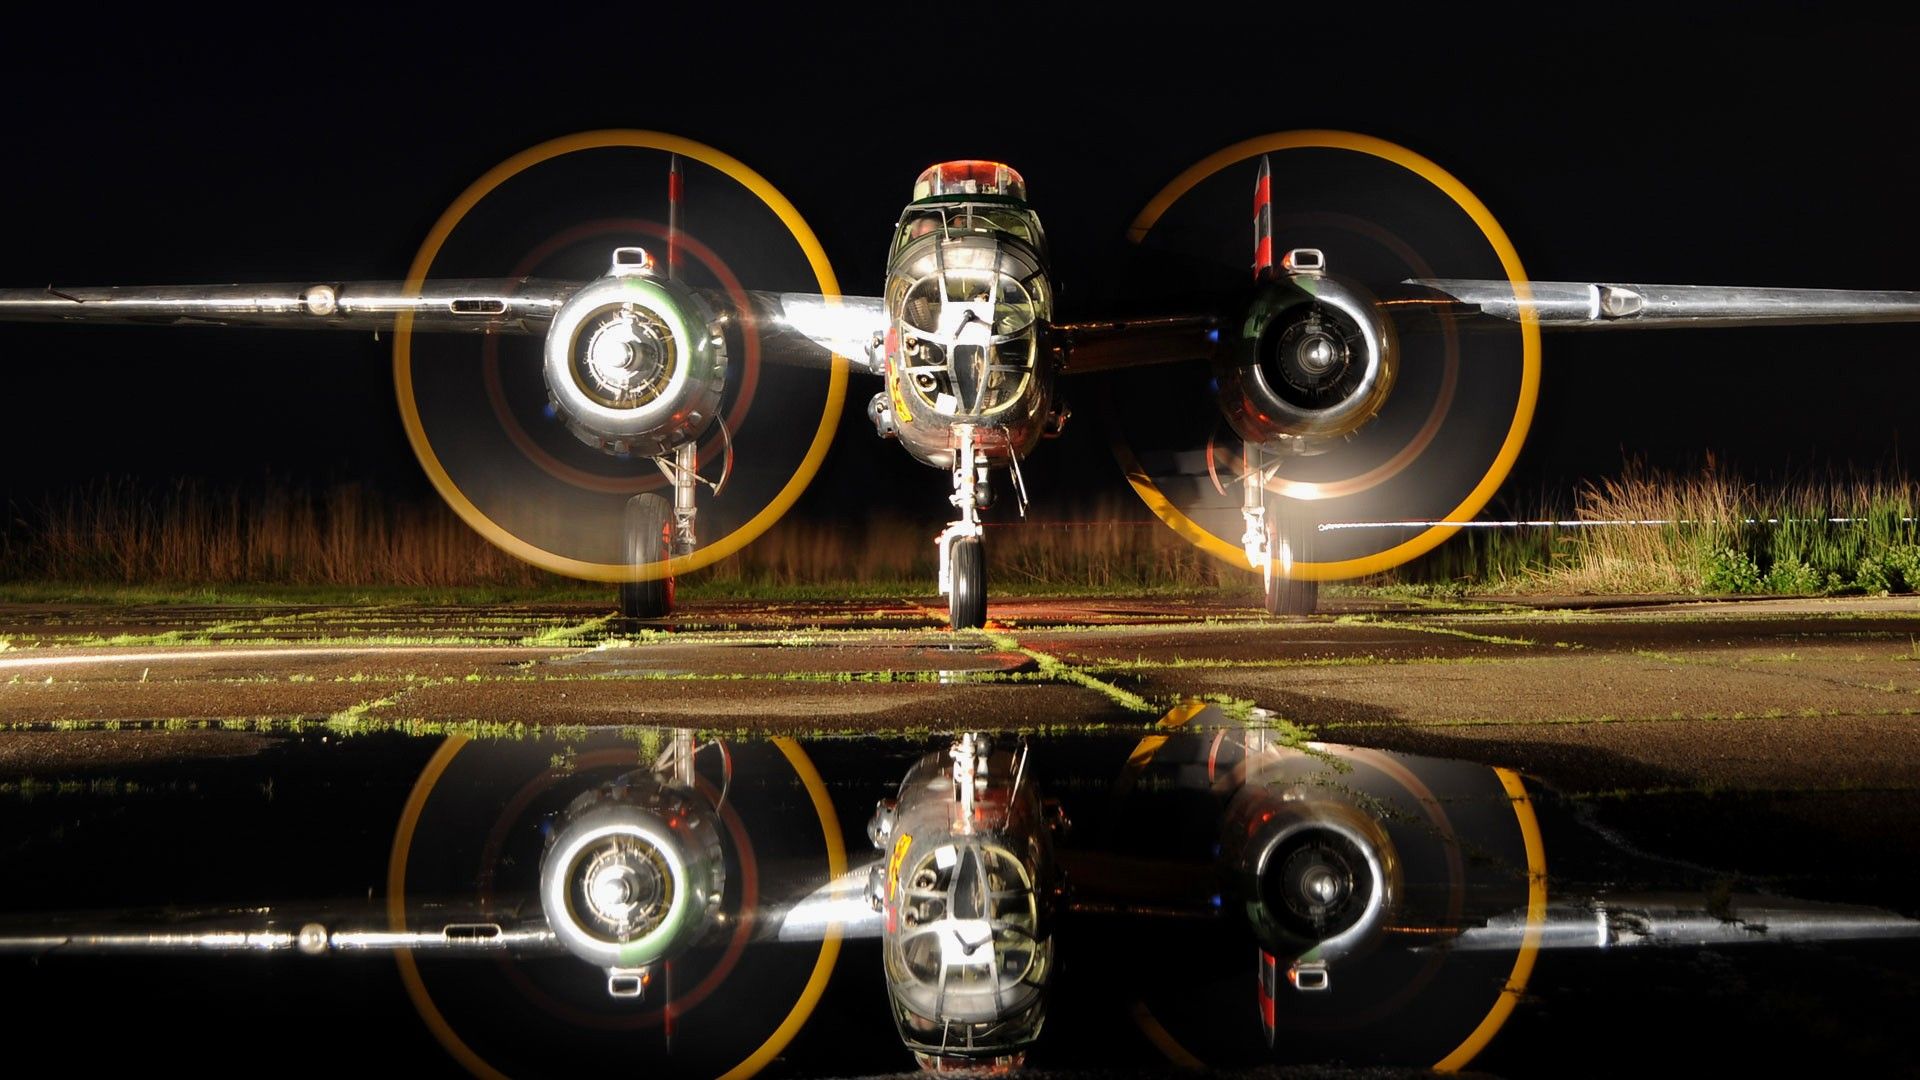 Airplane Plane WWII Timelapse Reflection vehicles aircraft military water reflection wallpaperx1080